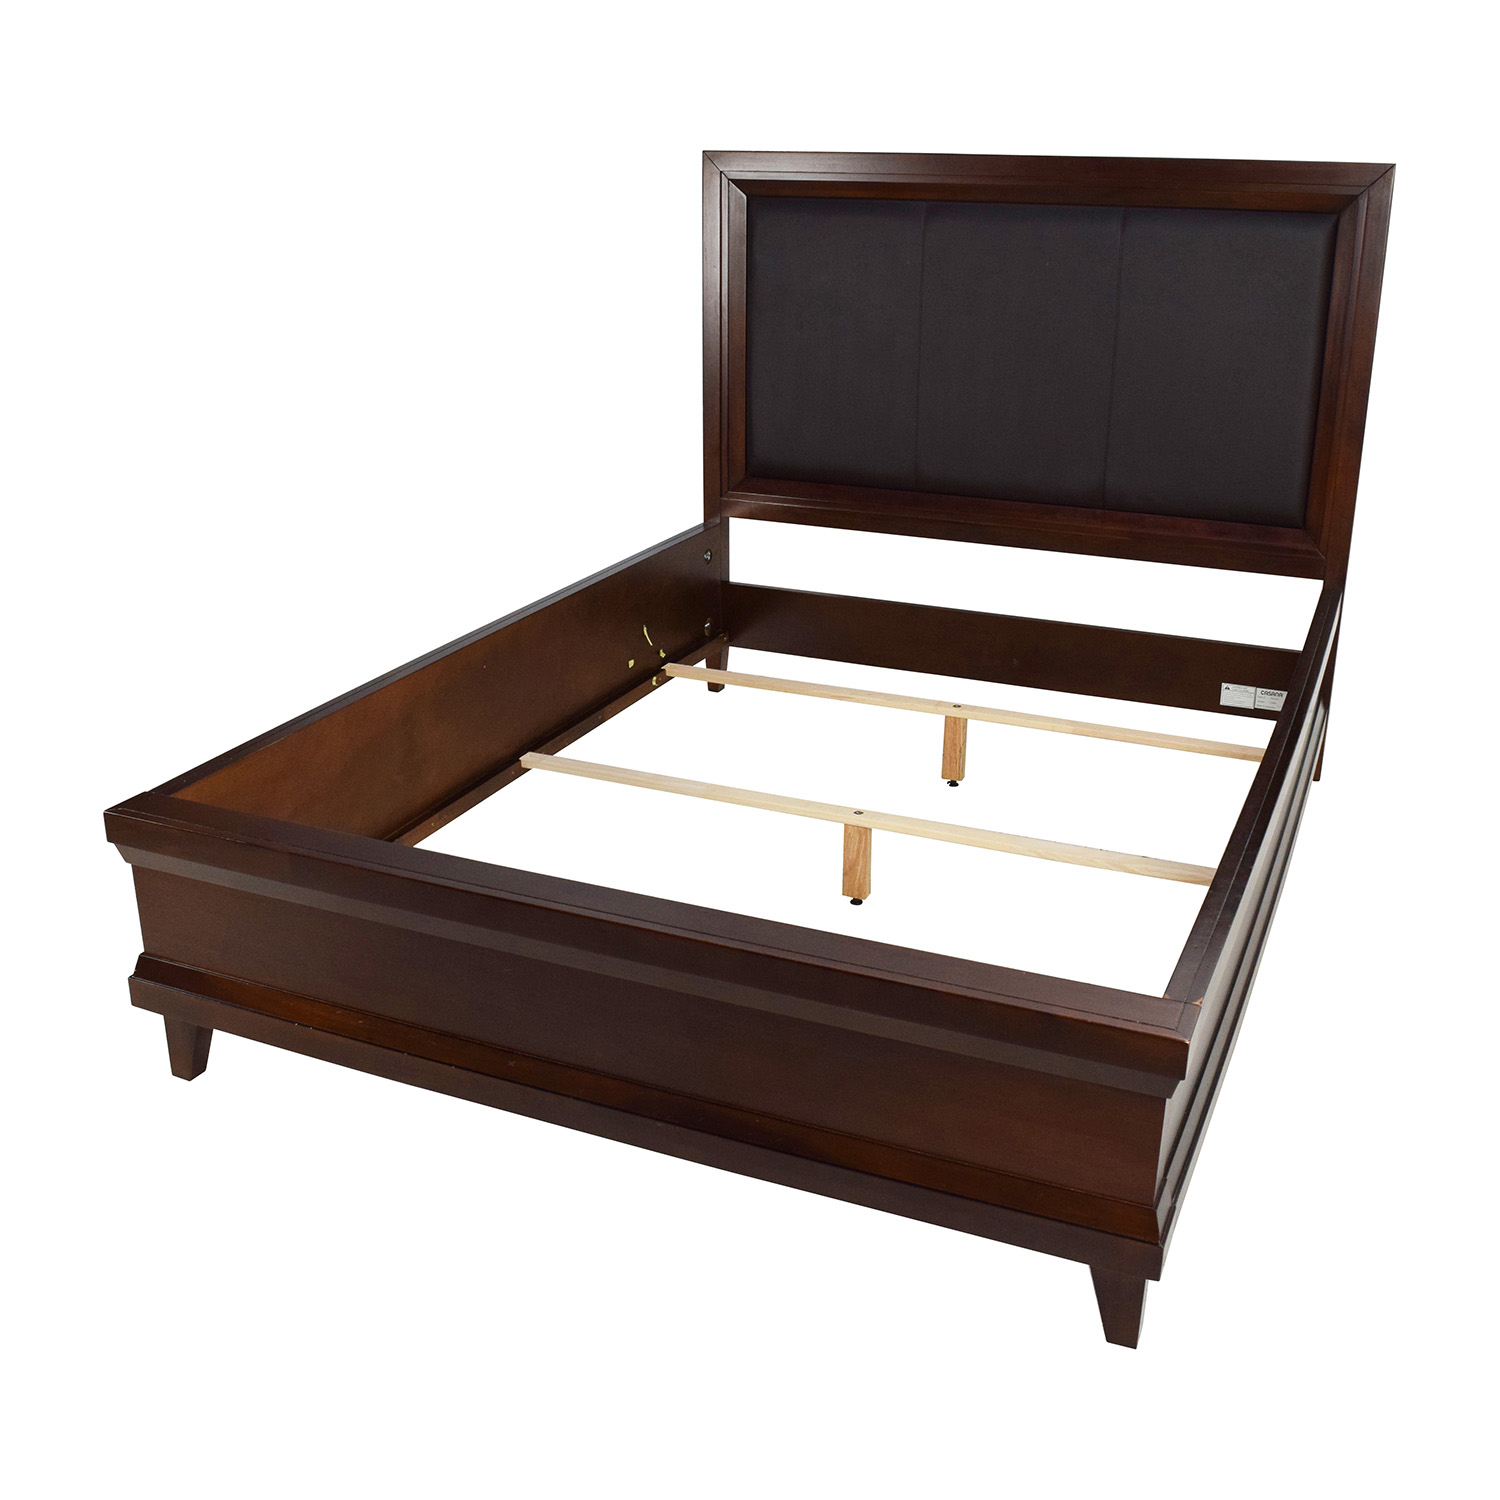 75 Off Raymour Flanigan Raymour Flanigan Vista Queen Bed With Leather Headboard Beds intended for sizing 1500 X 1500